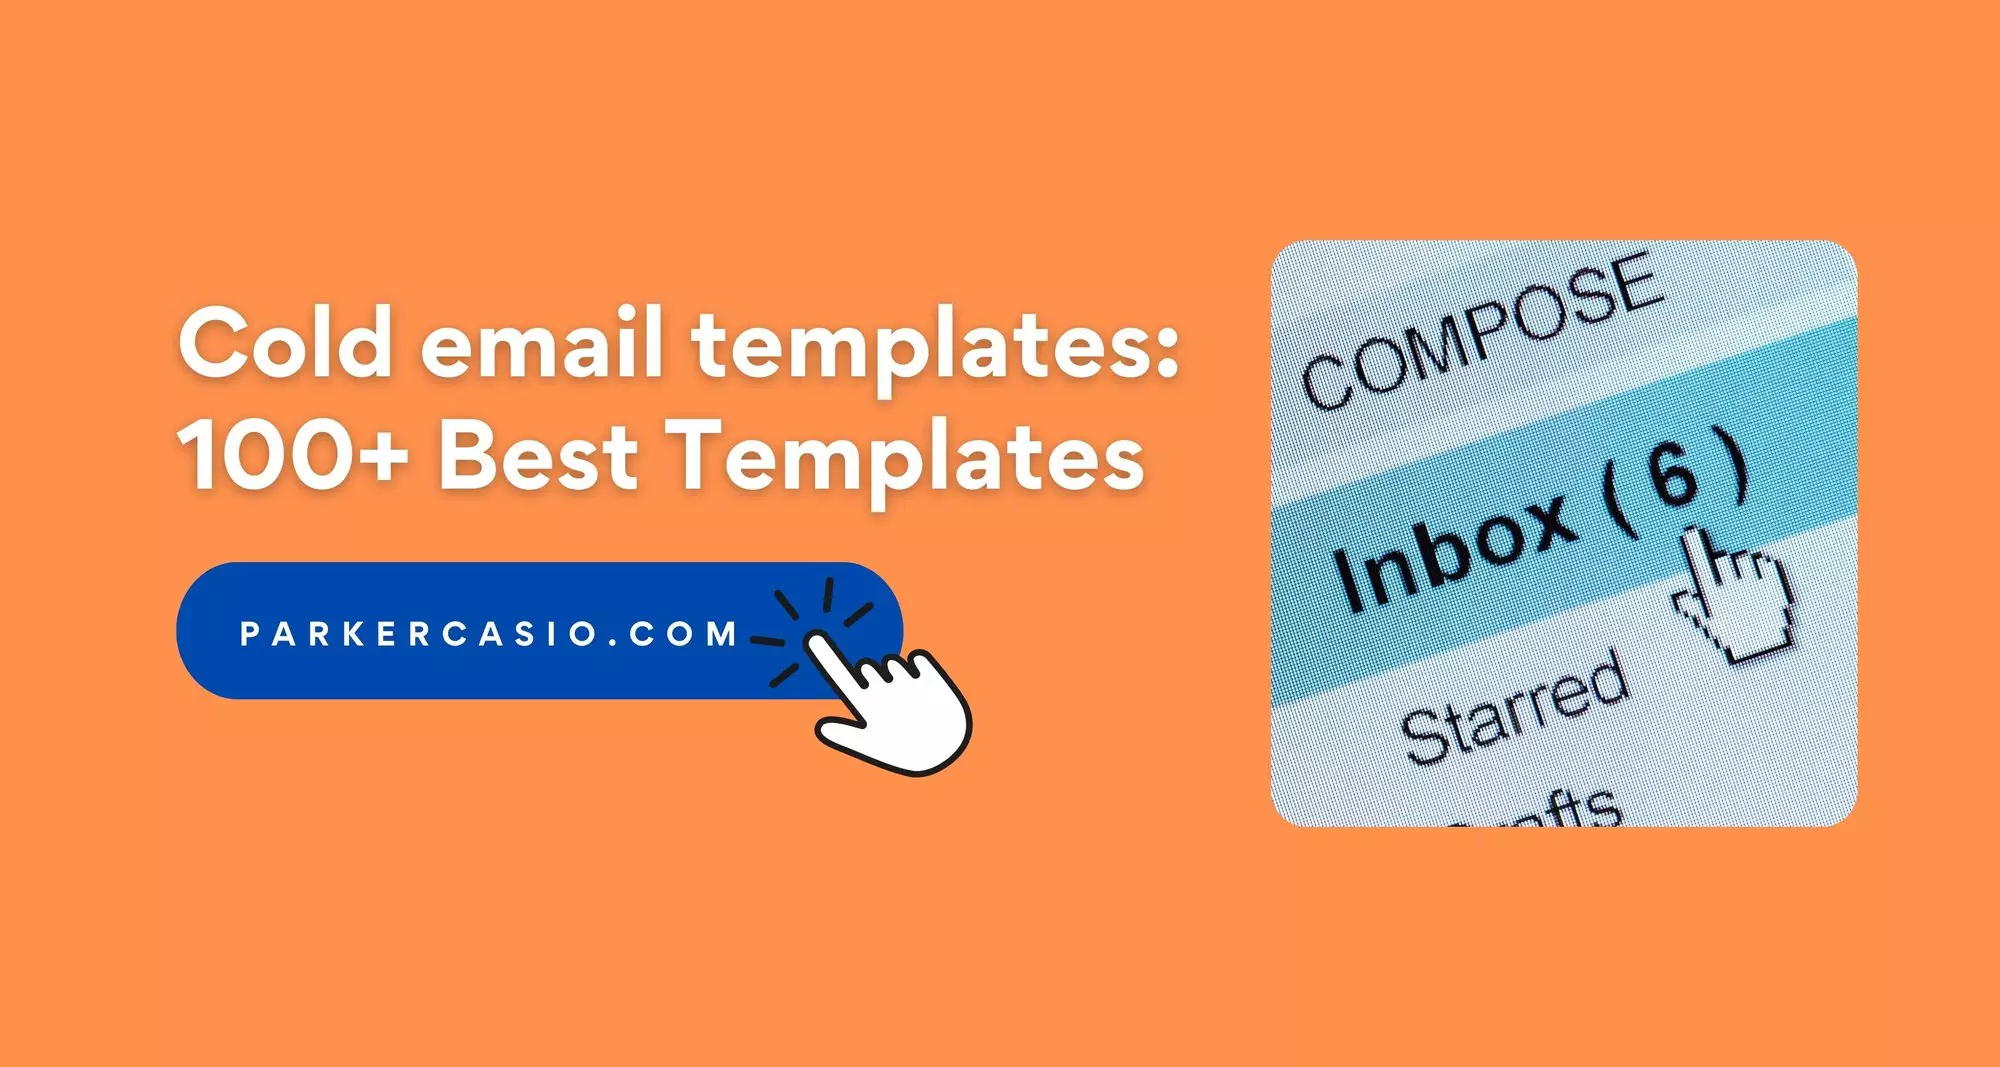 Cold email templates: Best 100+ Examples Based On Your Business Needs